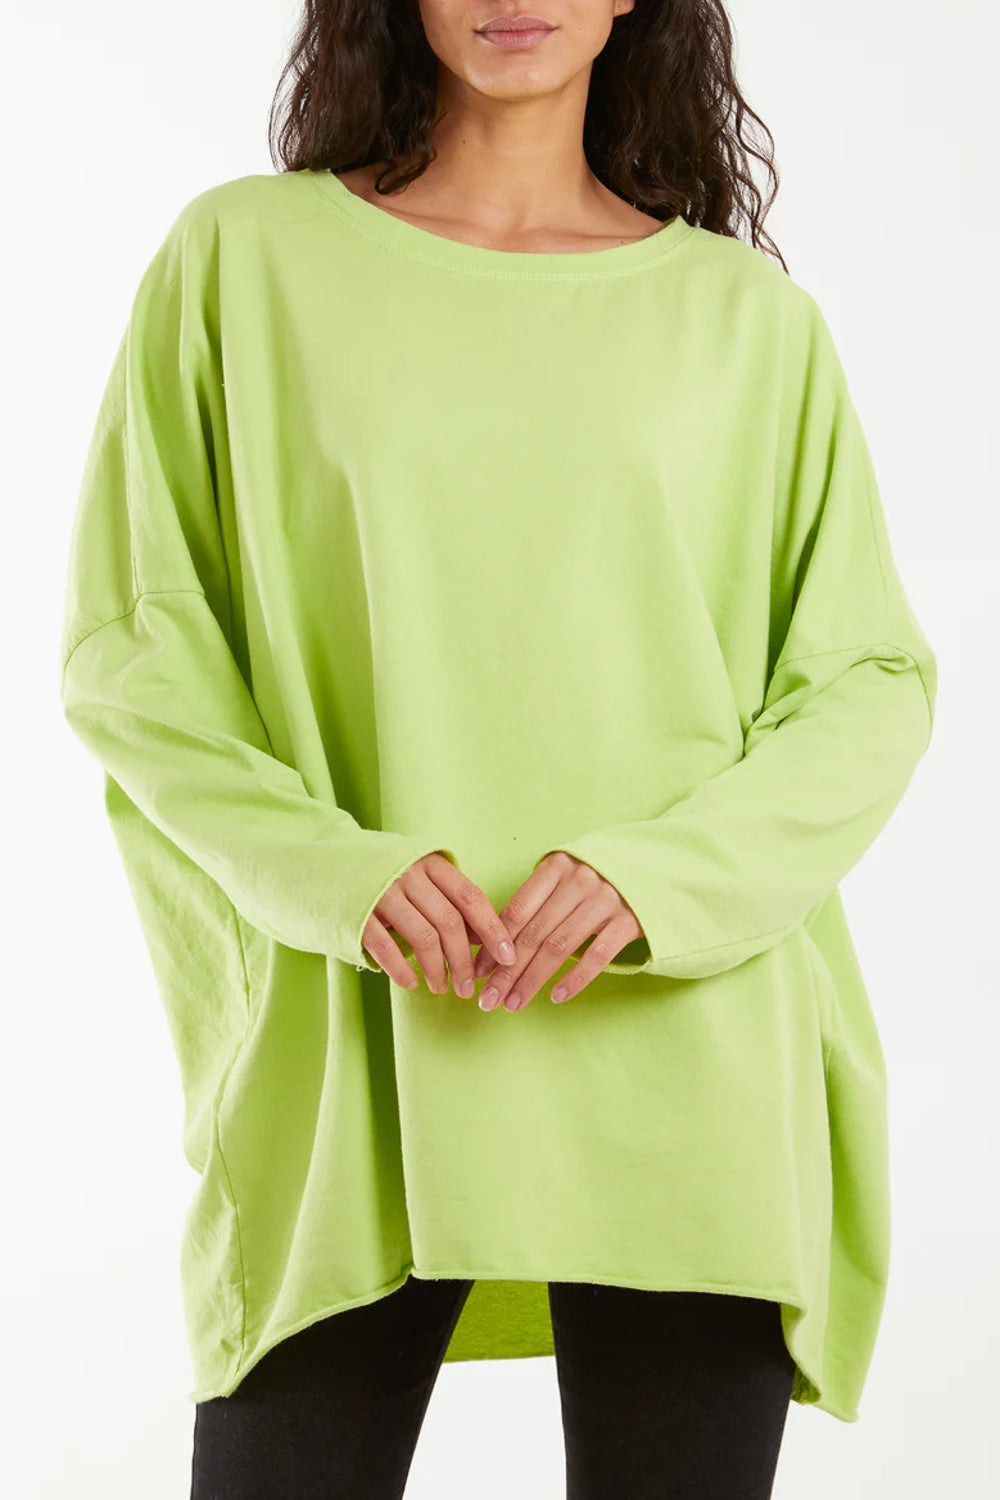 Lime Oversized Cotton Sweat Top